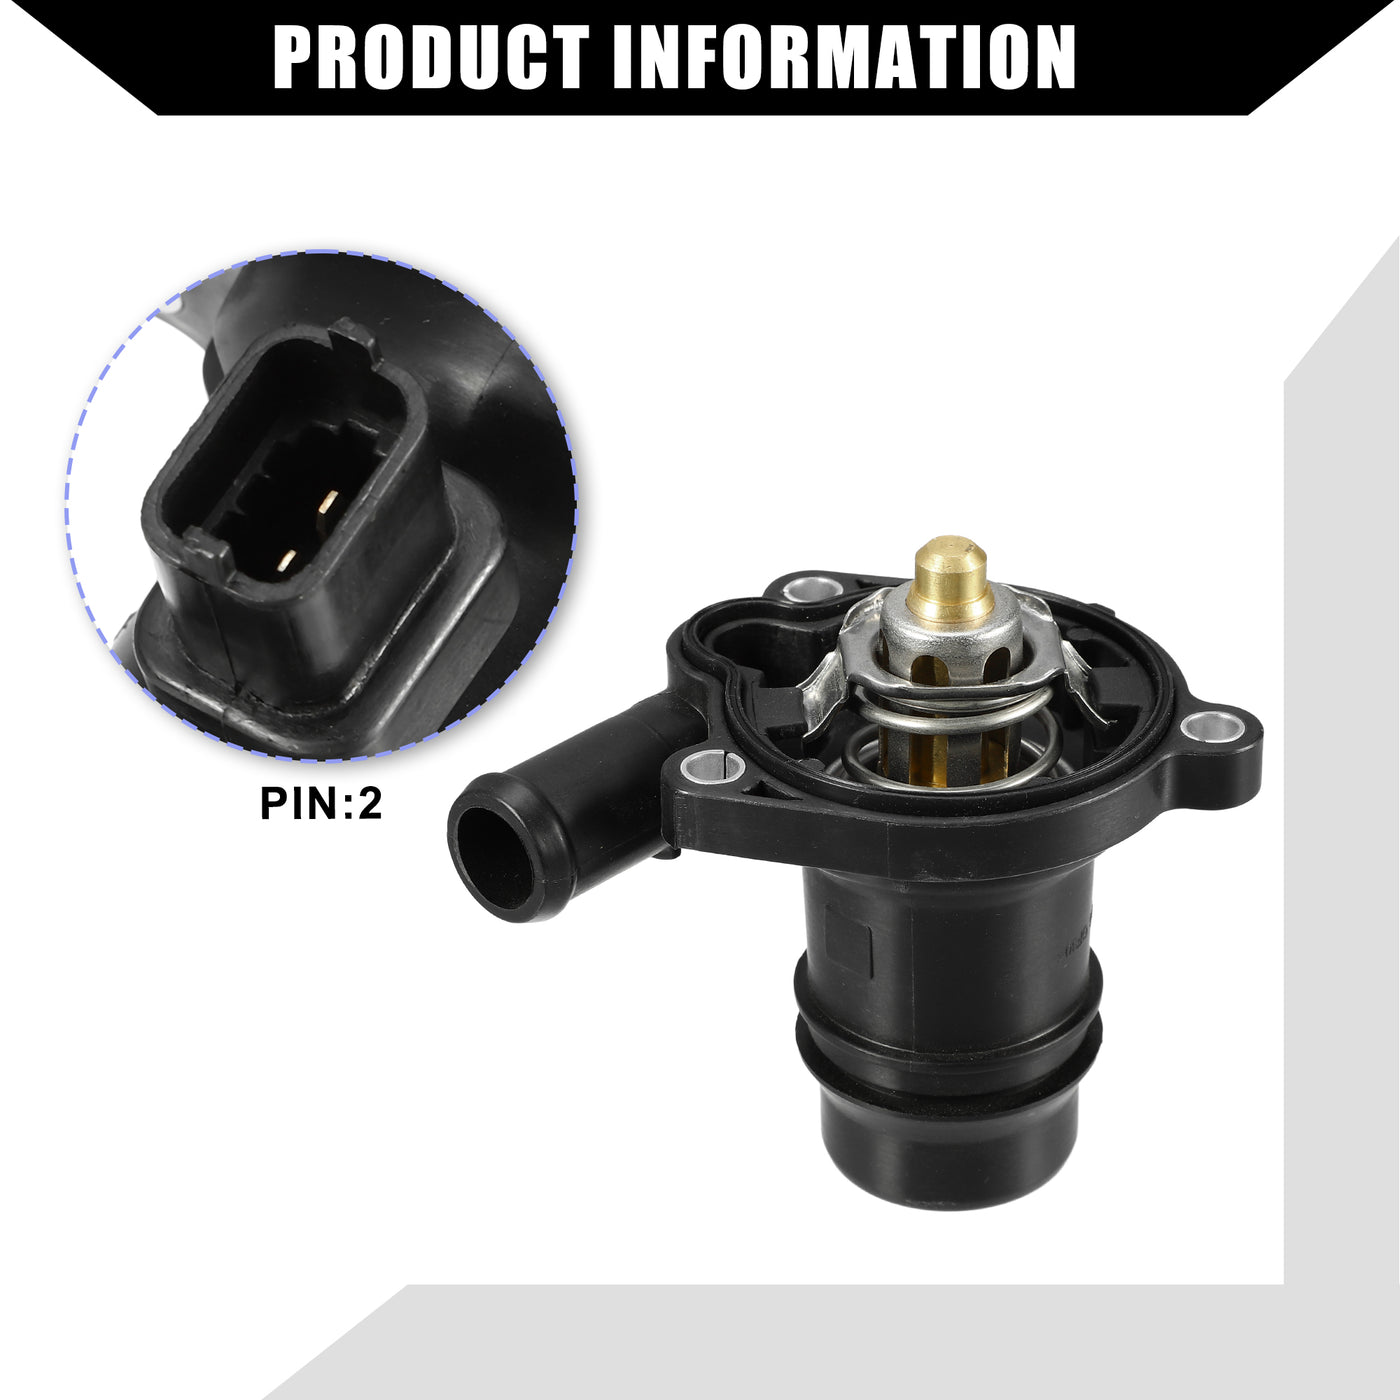 Hihaha No.55579010 Engine Coolant Thermostat Housing Assembly for Chevrolet Trax 2013-2019 for Chevrolet Sonic 2012-2019 / Inner Water Pump Thermostat / Durable Plastic / 1Pcs Black